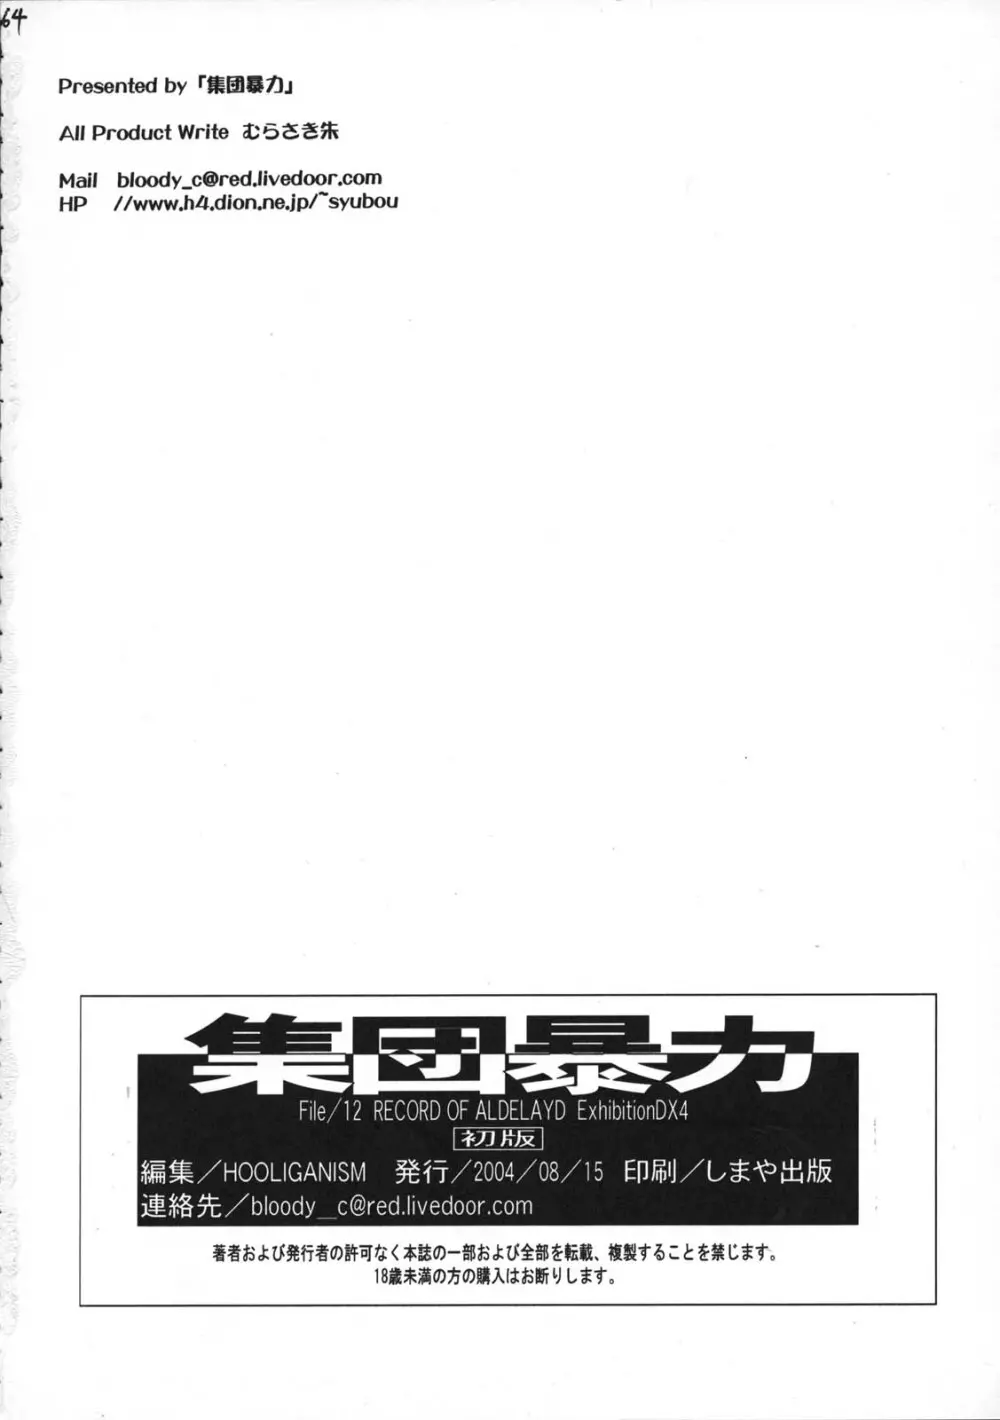 File/12 Record of Aldelayd - EXHIBITION DX4 Page.65